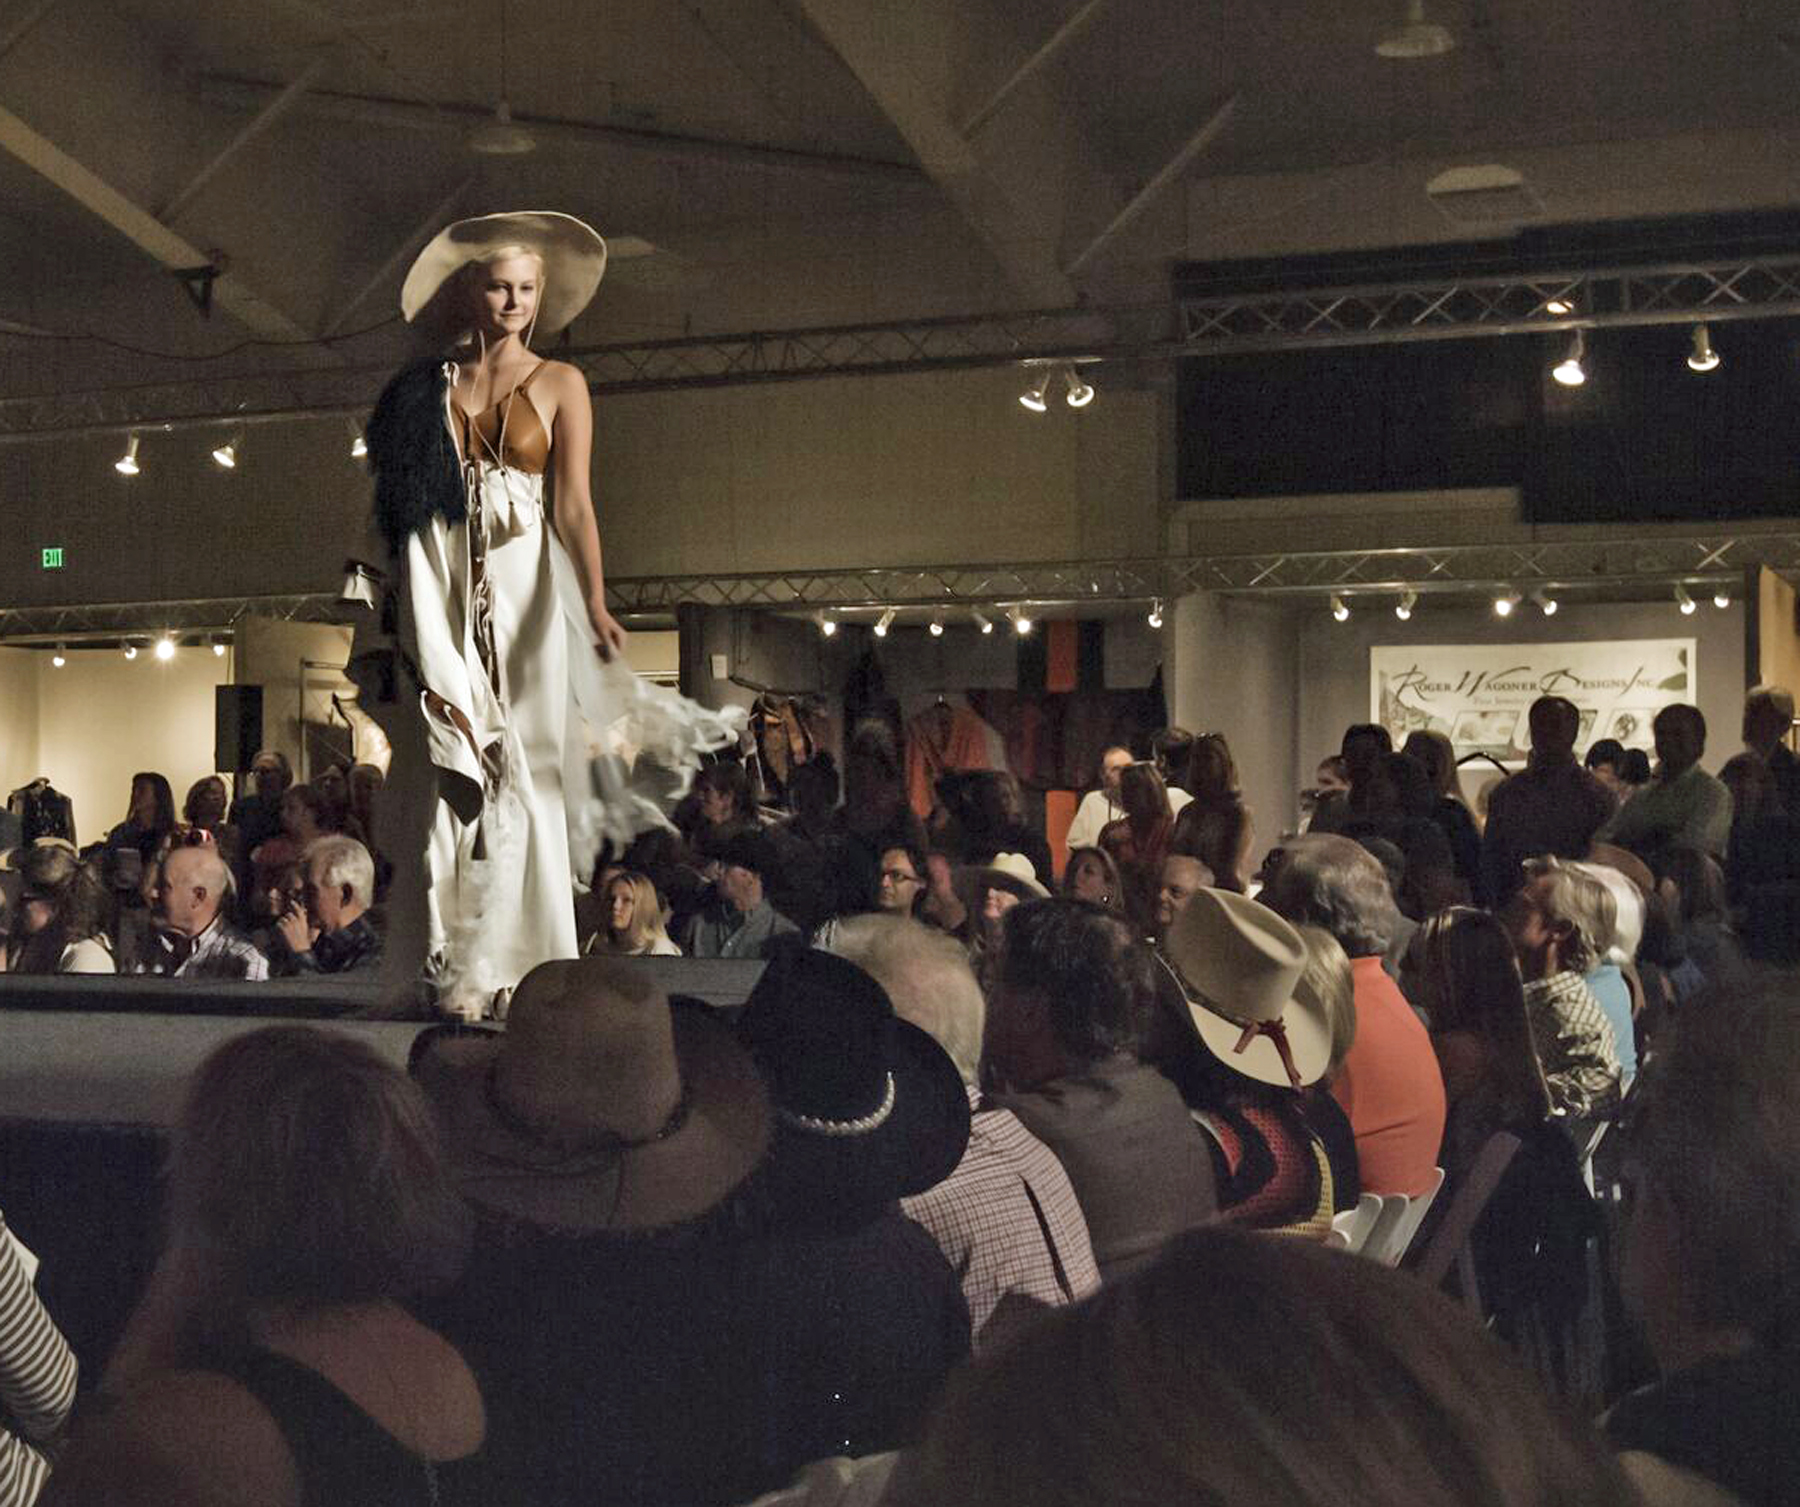 The always popular Opening Preview Party at the Western Design Conference & Sale features a live runway fashion show with cutting-edge Western couture such as Montana Dreamwear.